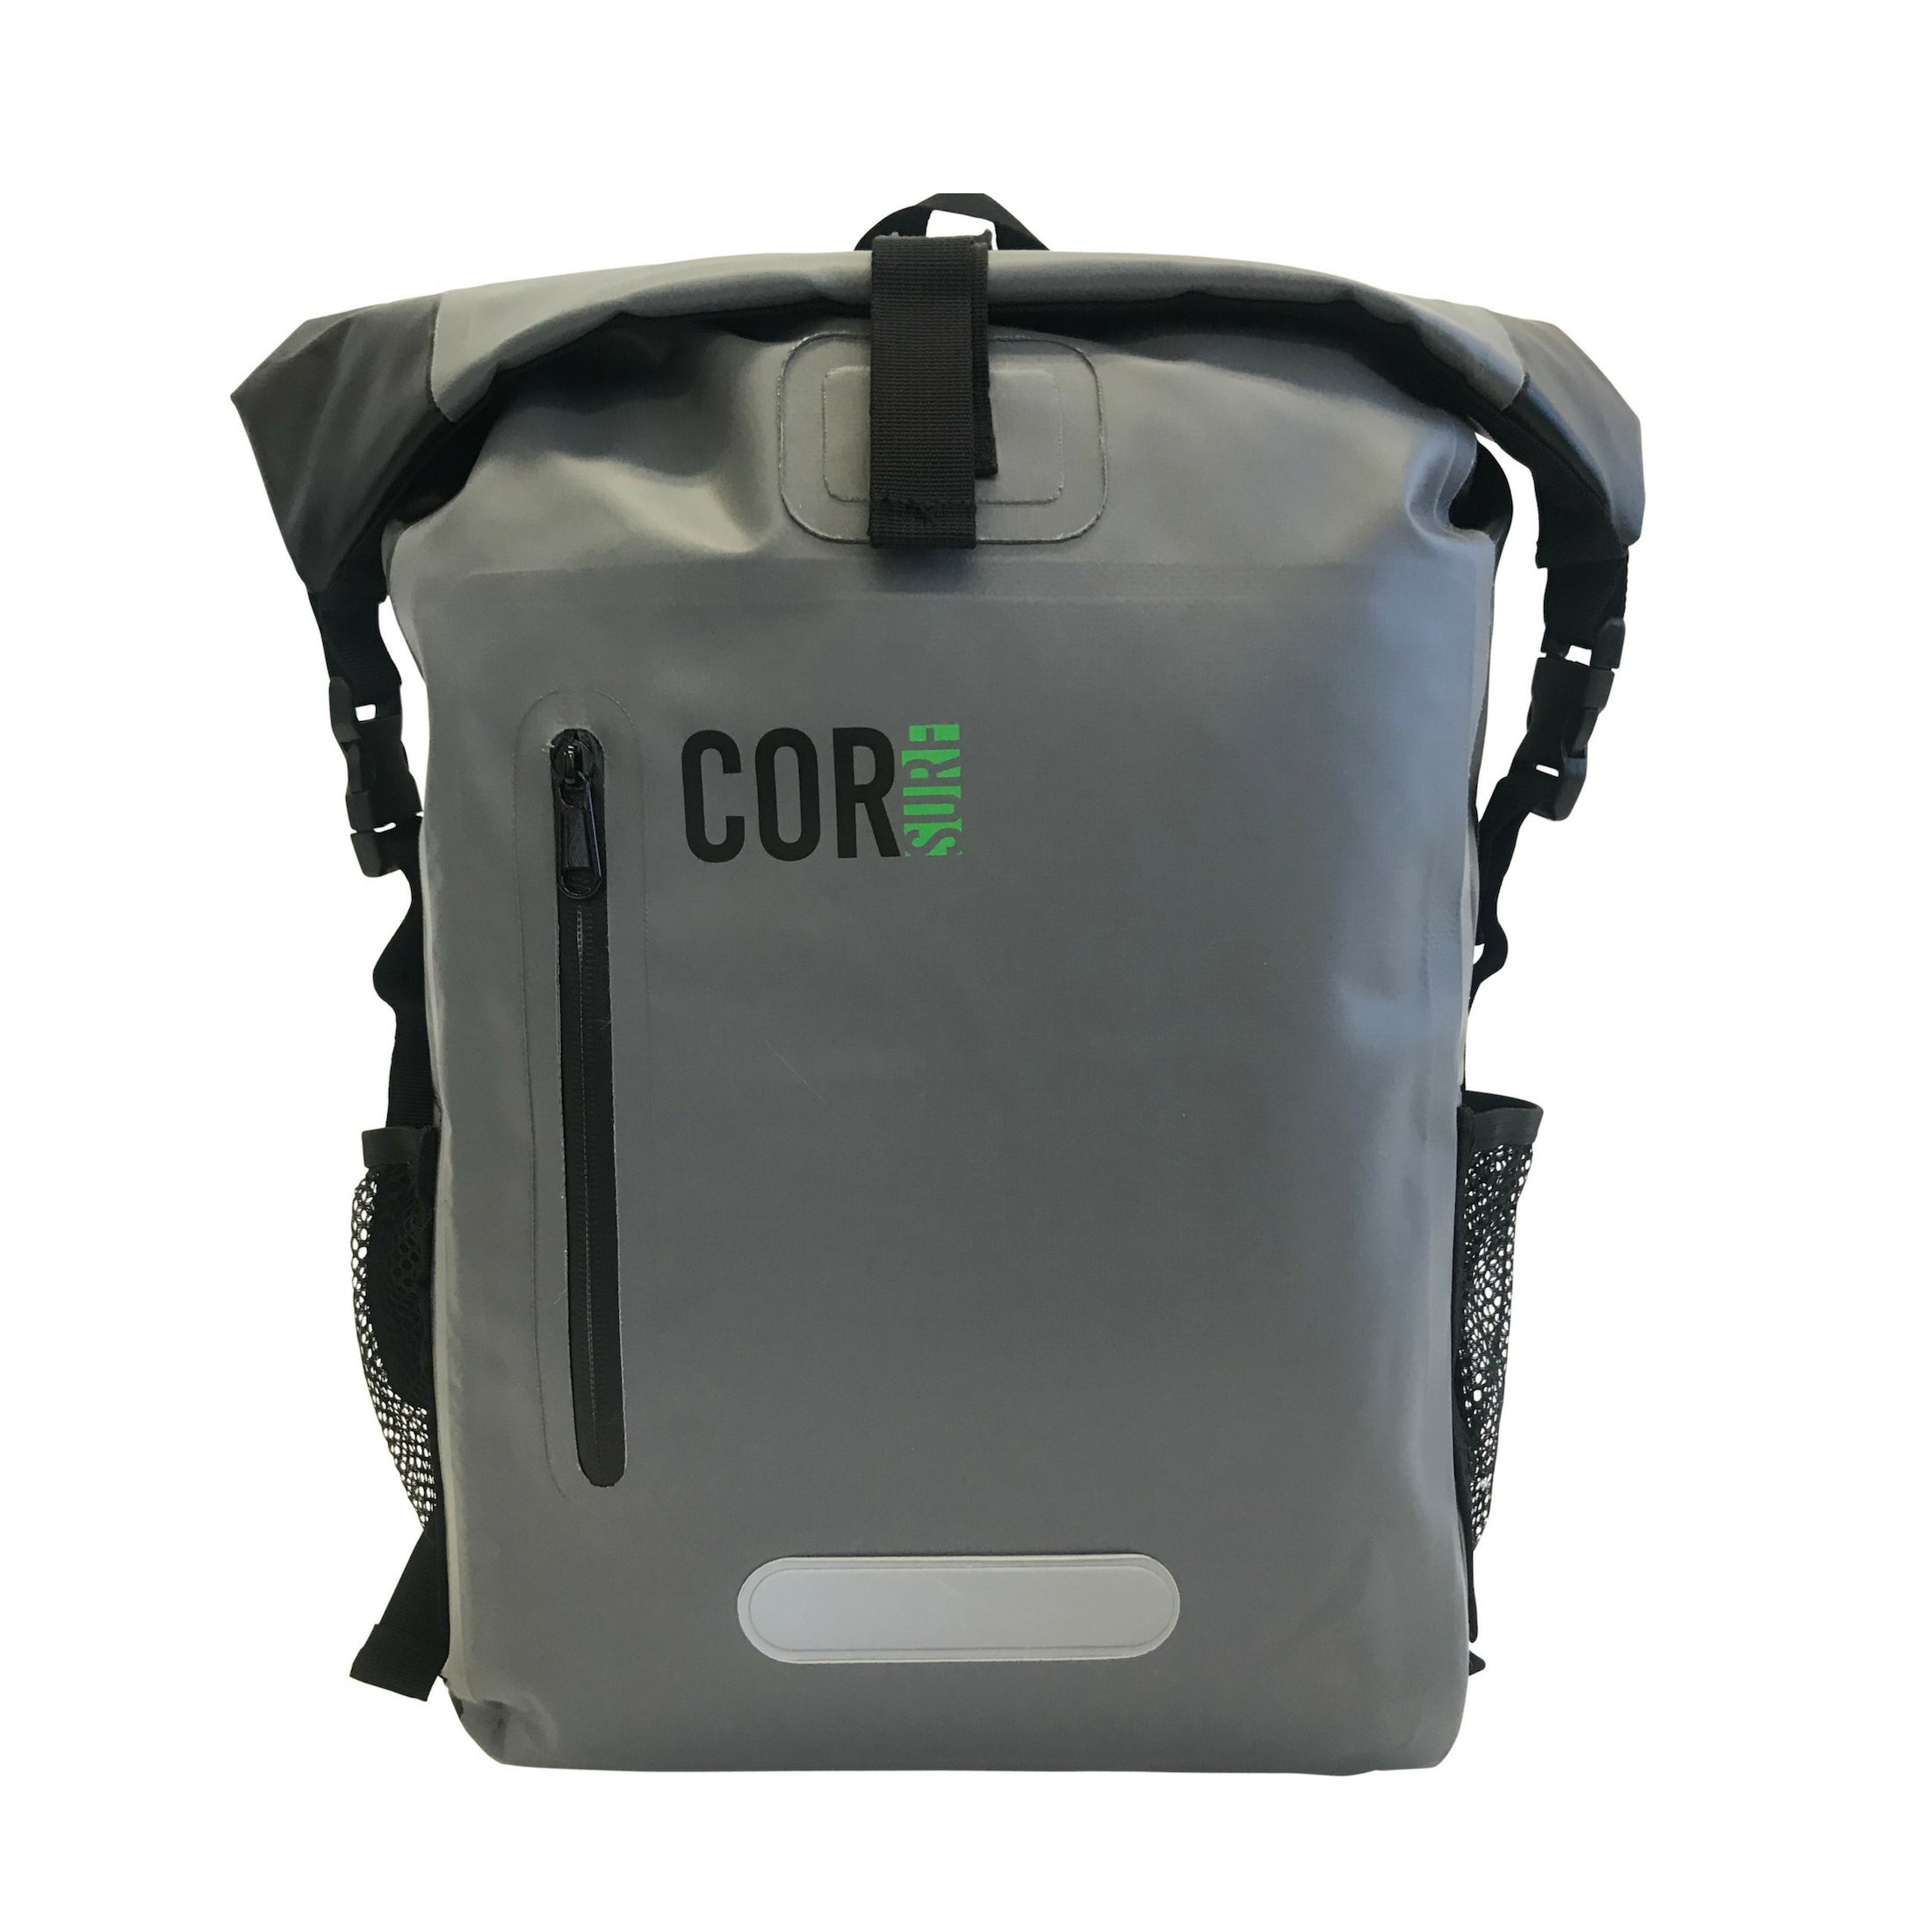 Cor Surf Waterproof Dry Bag Backpack with Padded Laptop Sleeve - 25L